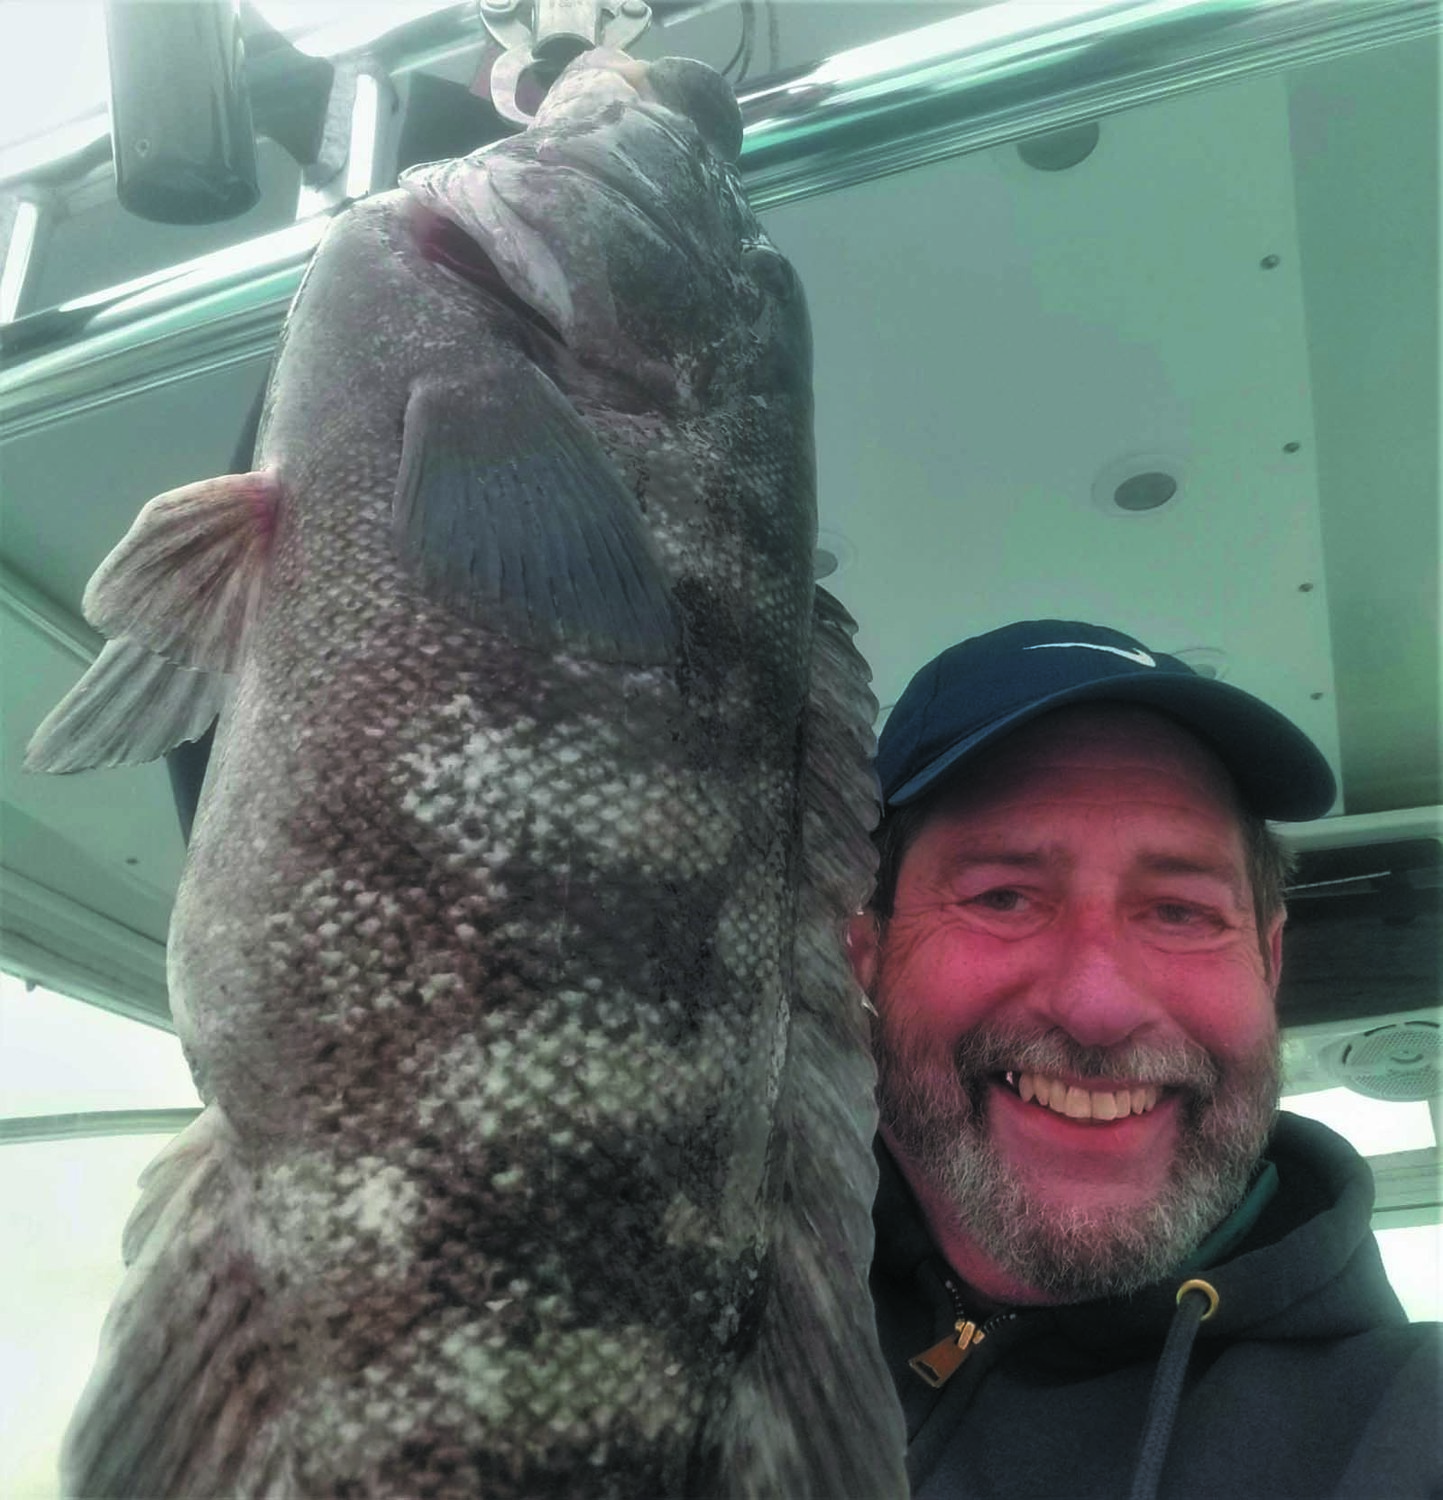 NK TAUTOG: Tautog season opened in RI and MA on April 1 with a three fish/person/day limit, 16” minimum size. Maximum of ten fish per vessel. Capt. Monti with a 2020 tautog caught with jig and green crab.